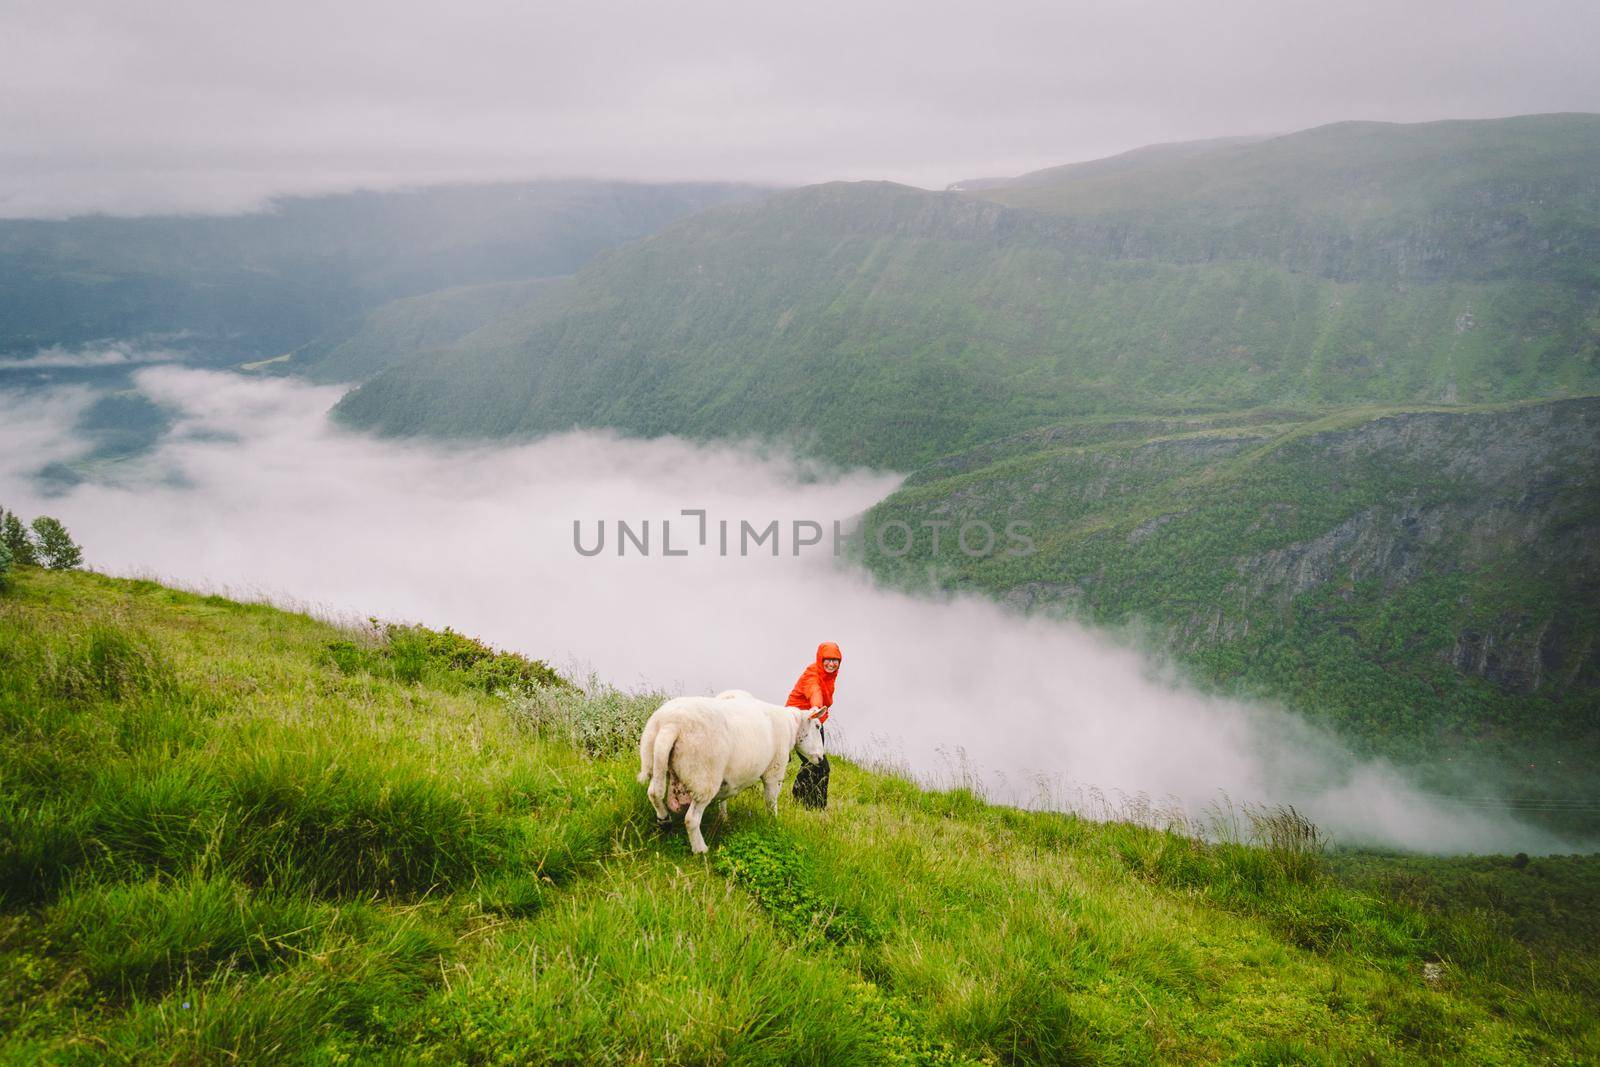 Woman hiker posing on mountain in norway, rainy weather near sheep. Tourist and cattle on clearing in hill area, north norge in foggy. exploring nature in Scandinavia.